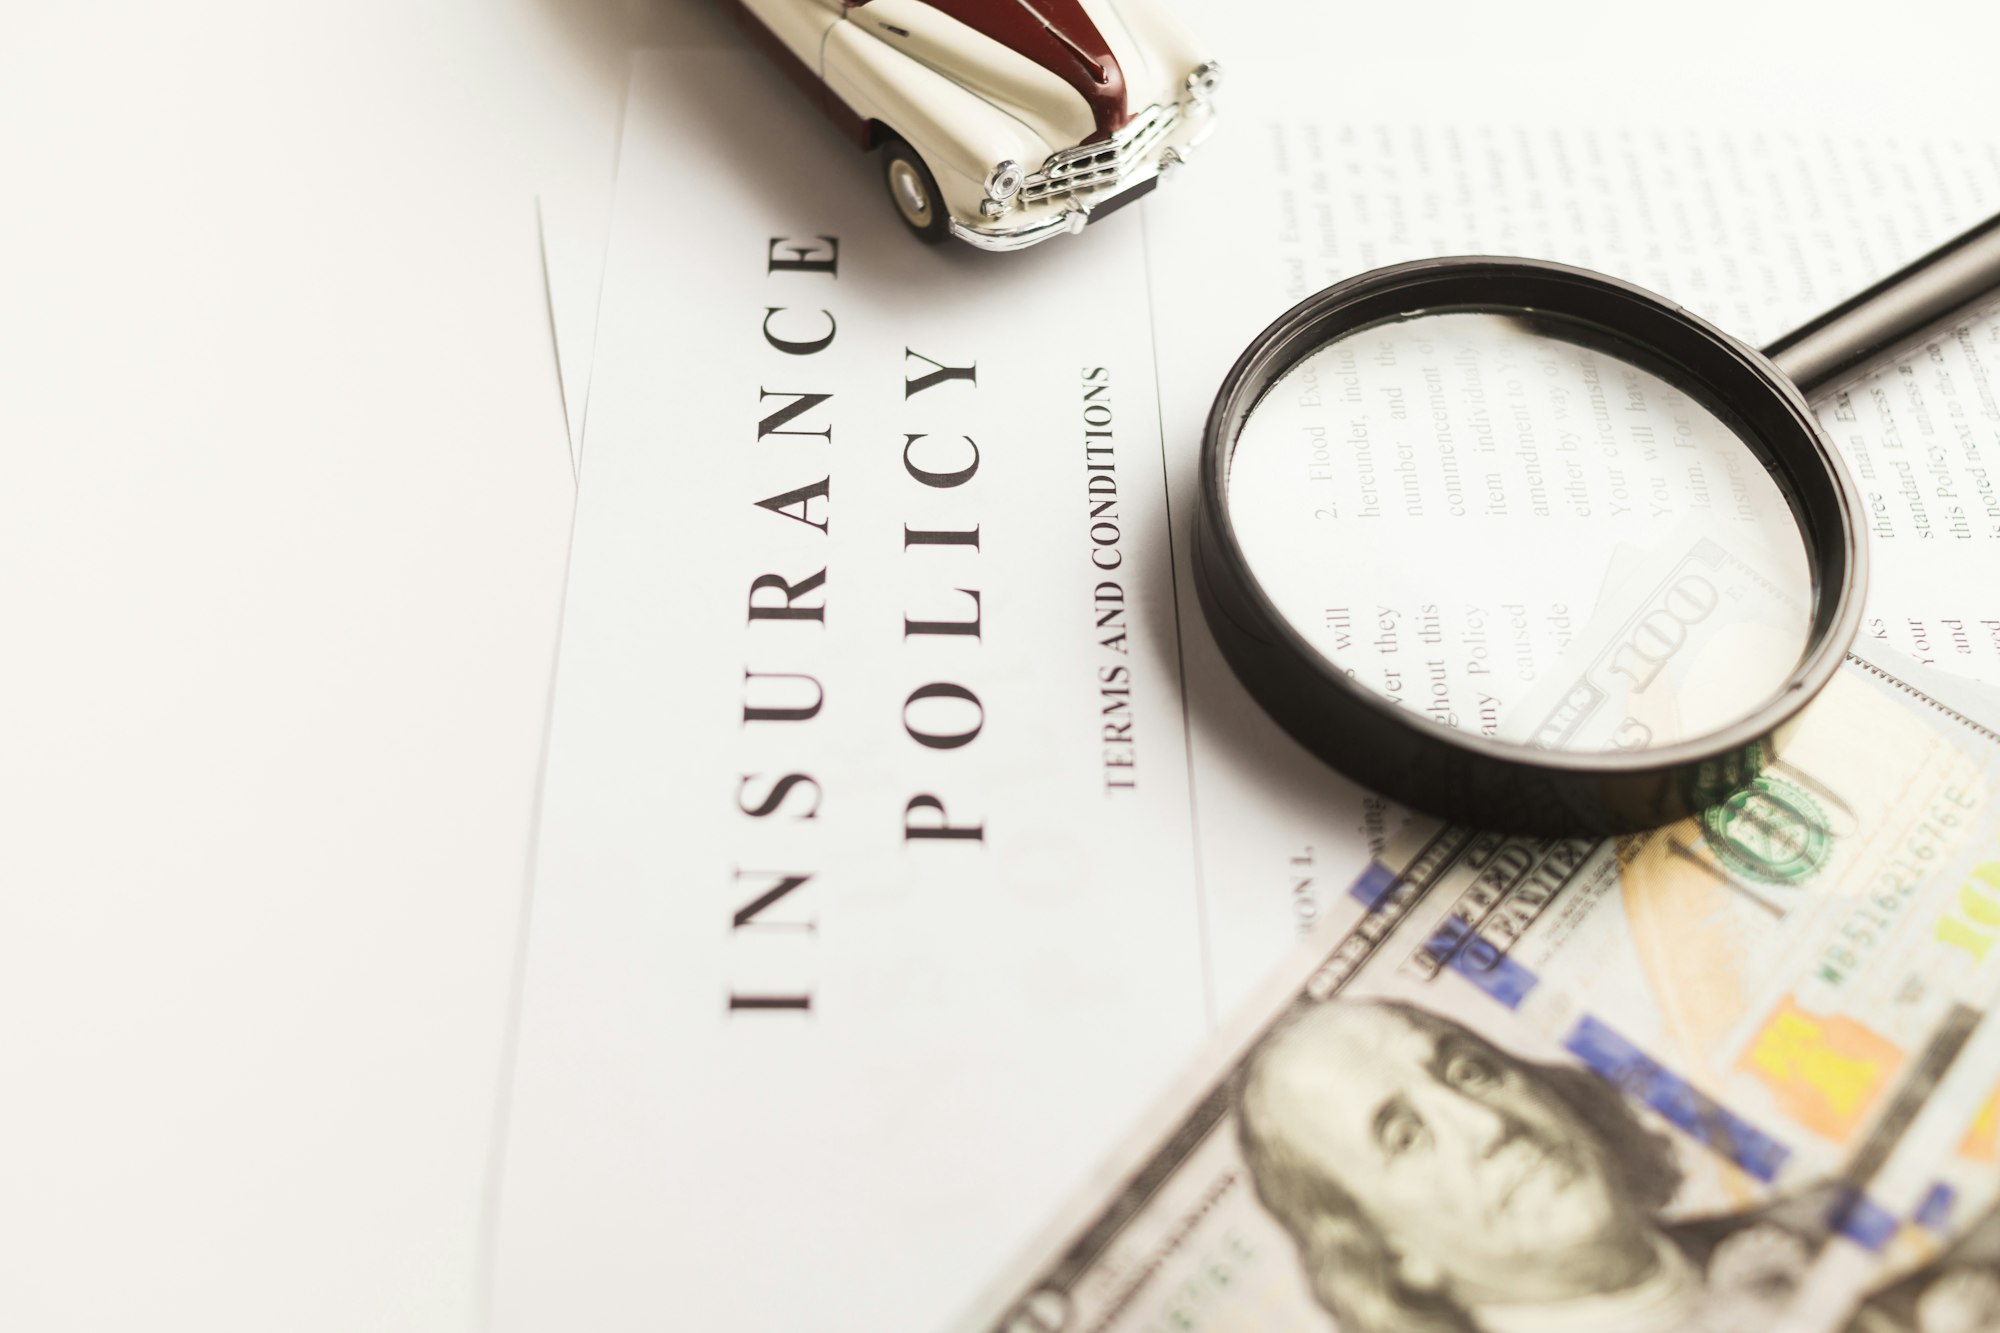 Certificate of motor insurance and policy with car and dollar bills.